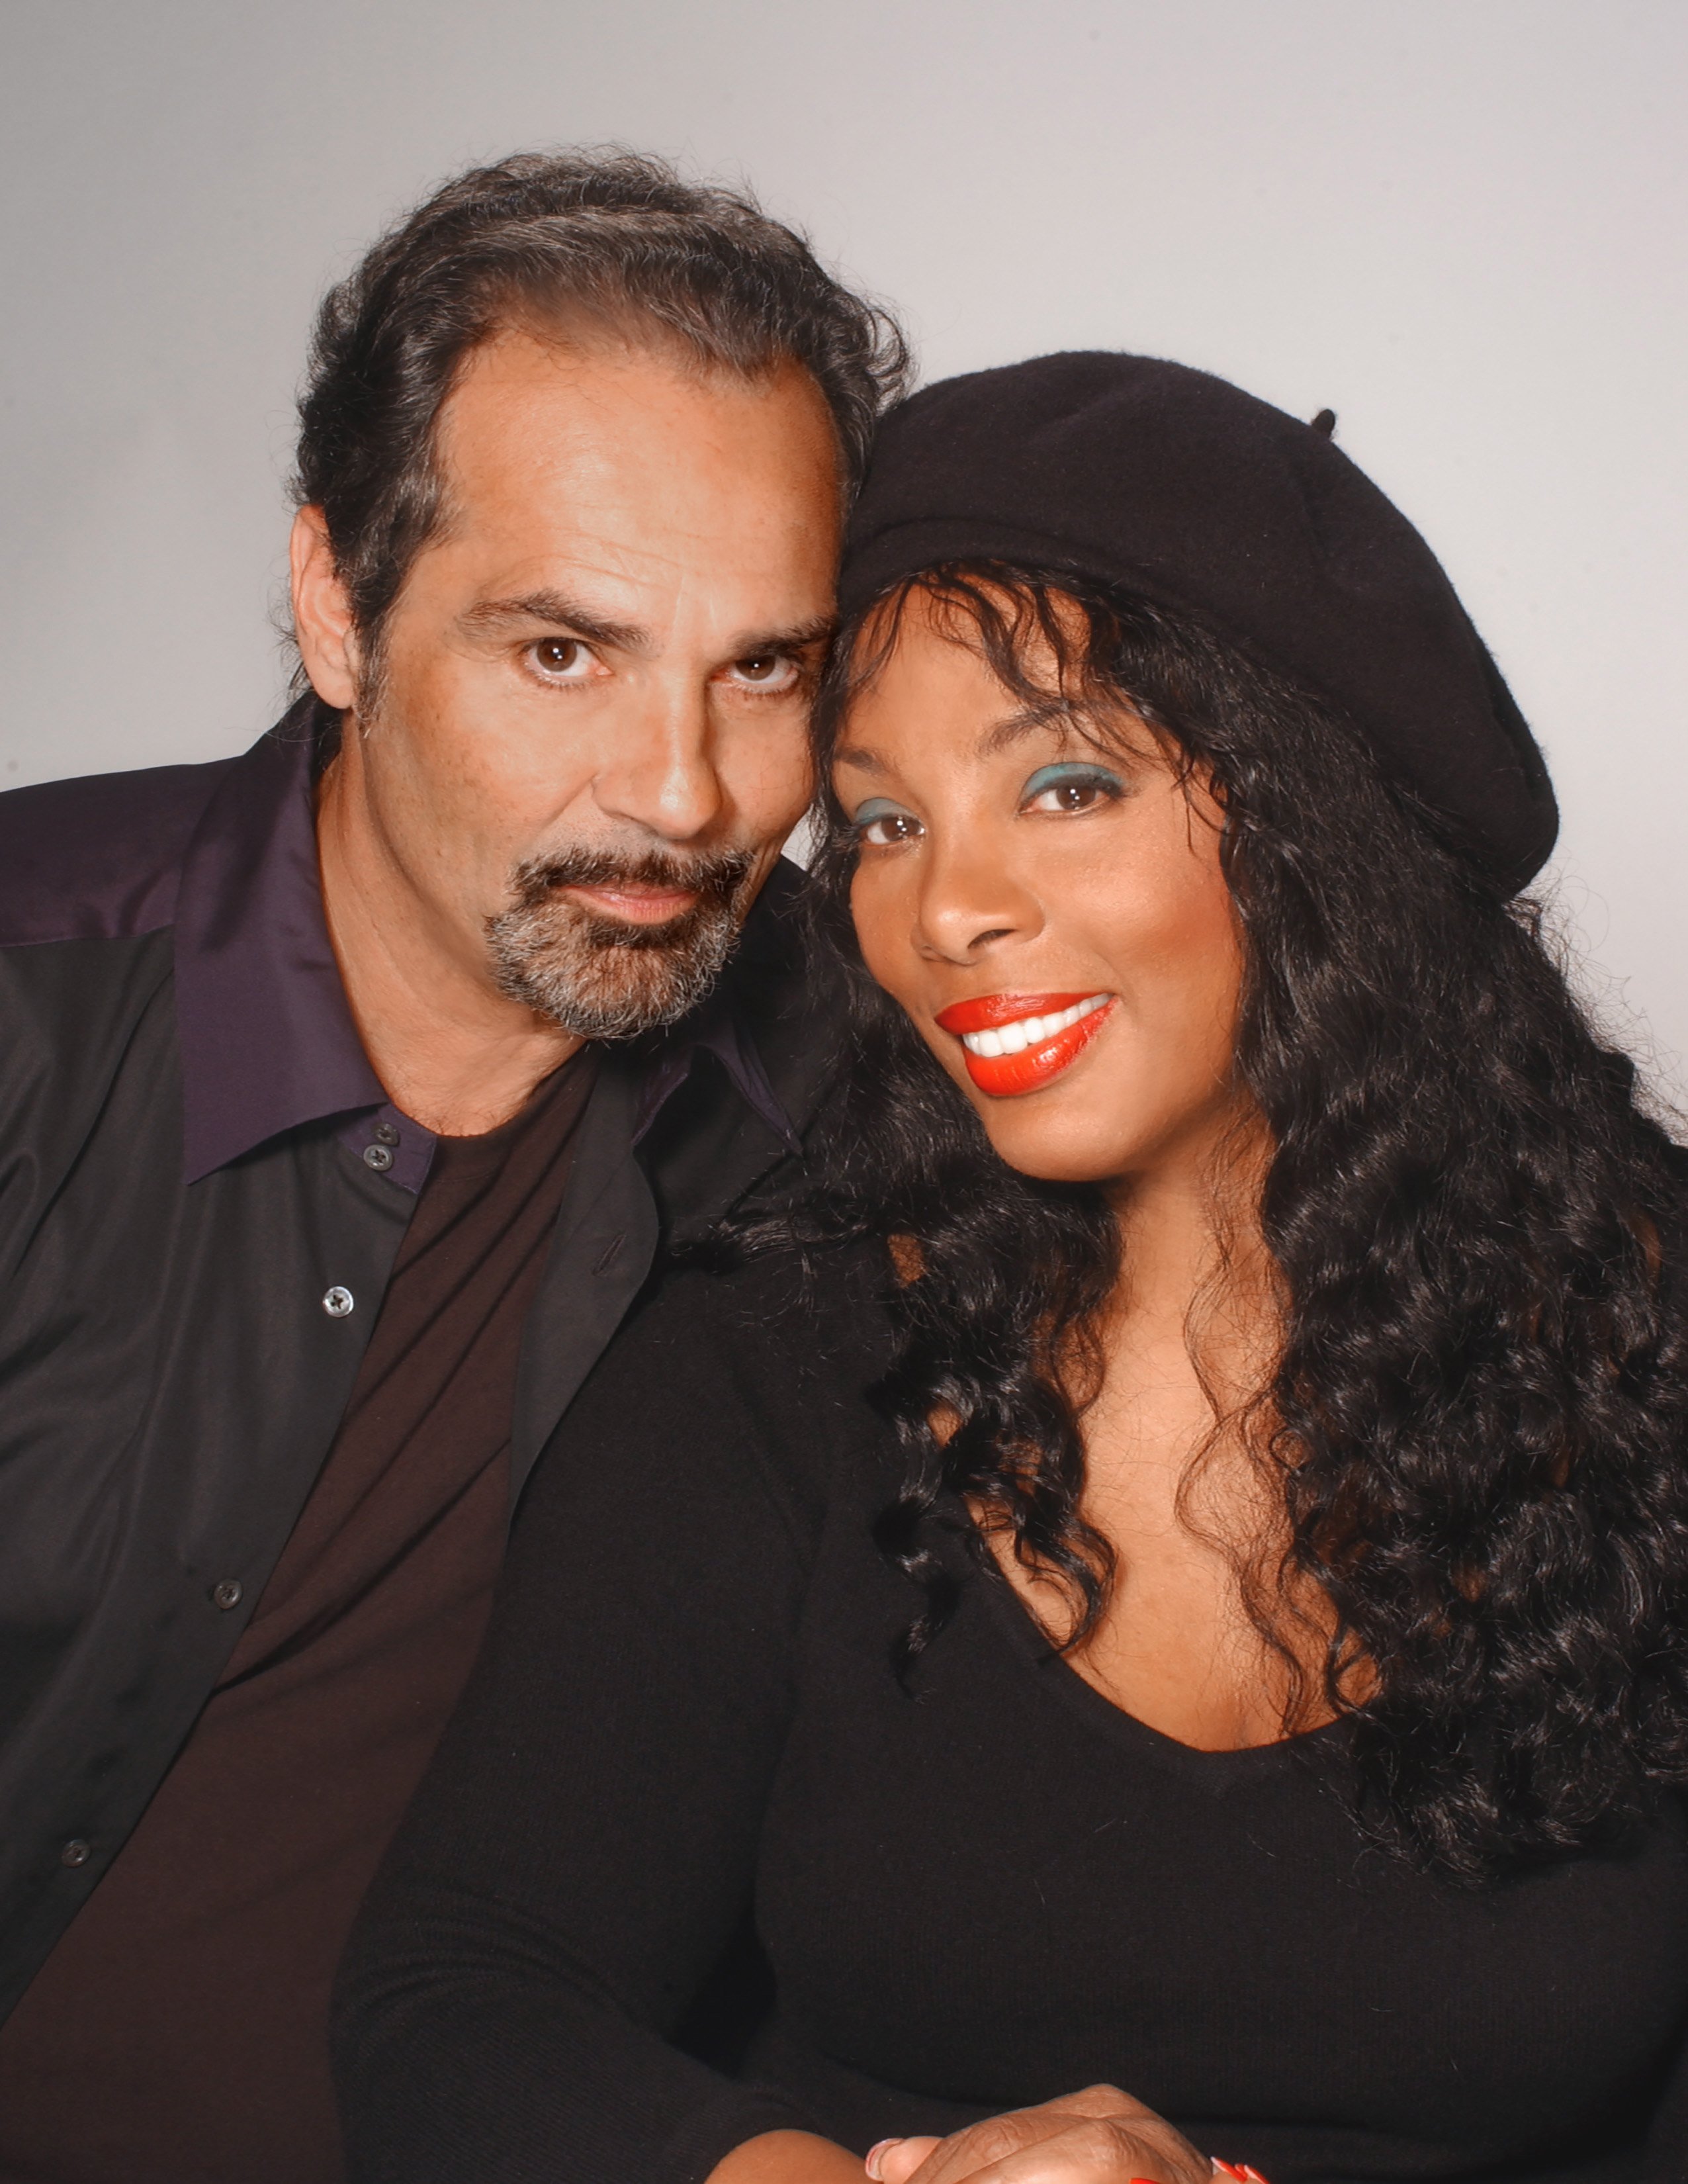 Singer Donna Summer and Bruce Sudano poses for a portrait in 1990 in Los Angeles, California | Source: Getty Images